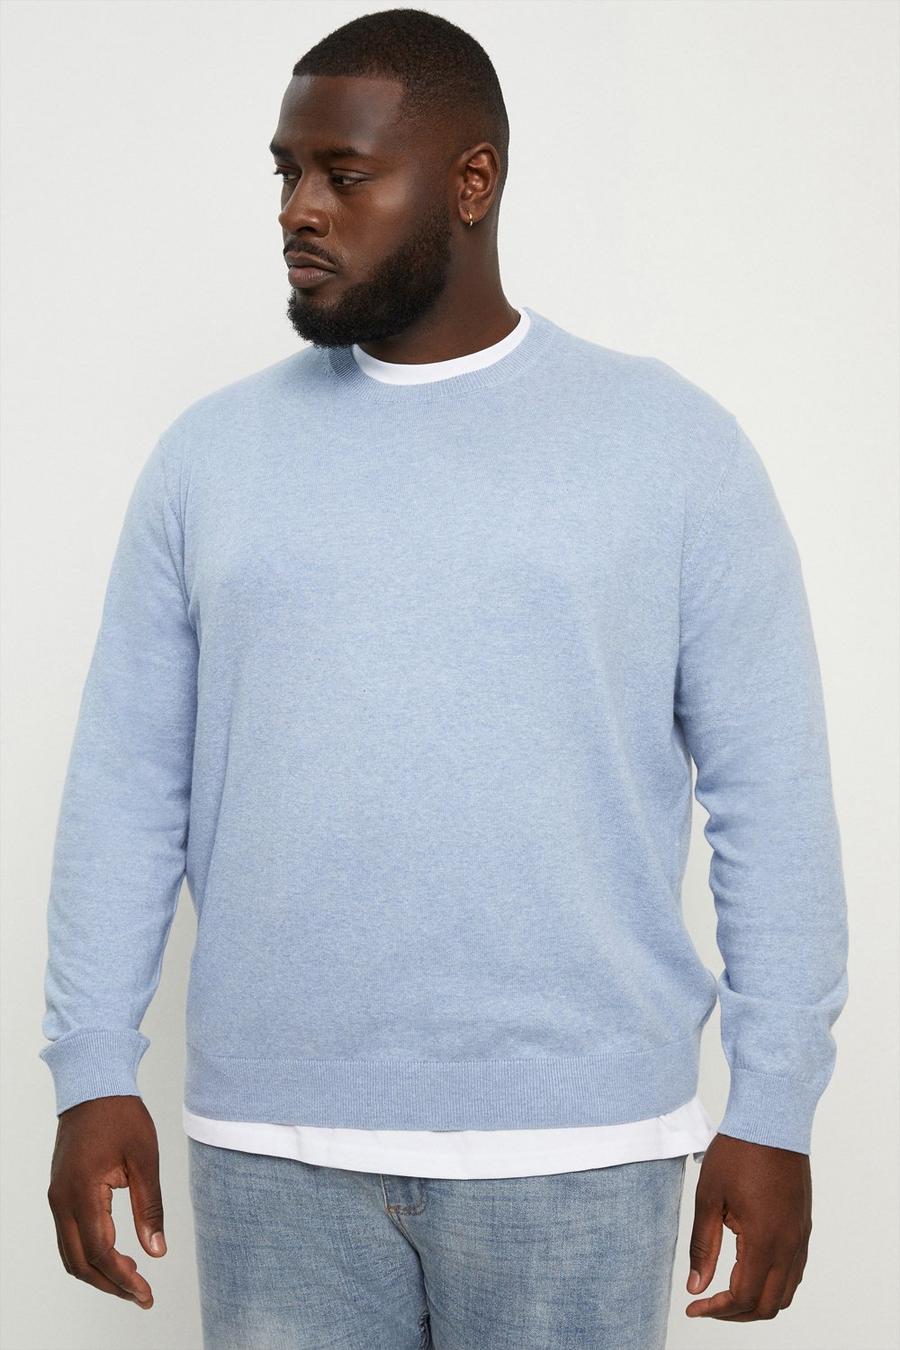 Plus And Tall Blue Knit Crew Neck Jumper